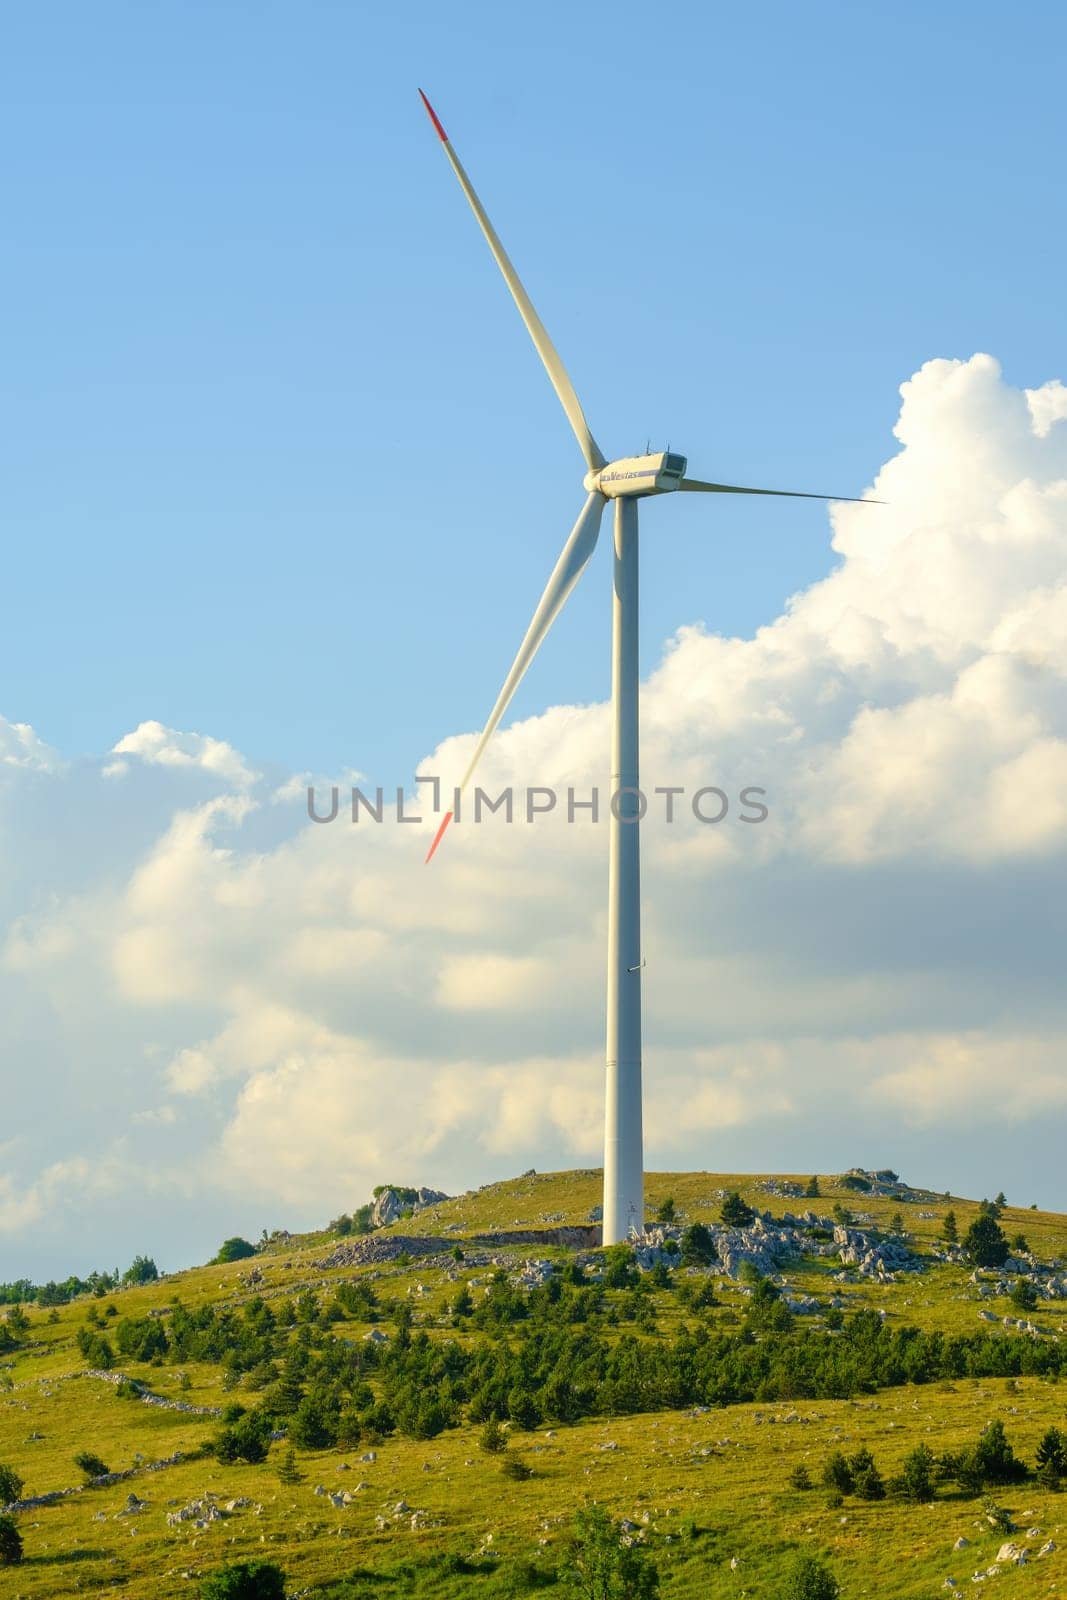 Wind turbine produce electrical green energy from kinetic energy. Tower stands on hill generating renewable power against blue sky with clouds